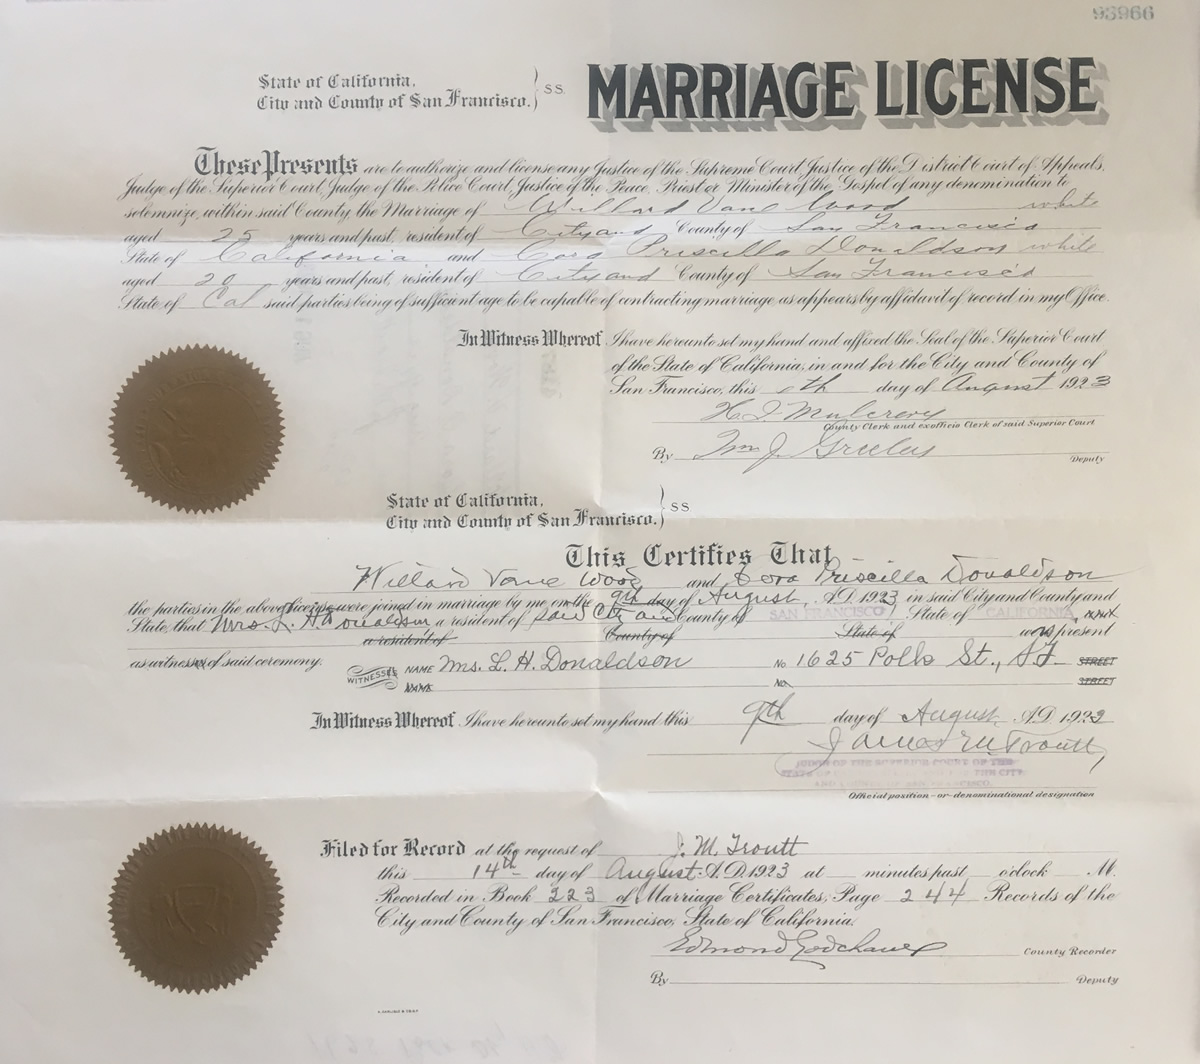 San Francisco marriage certificate of Willard Wood and Cora Donaldson